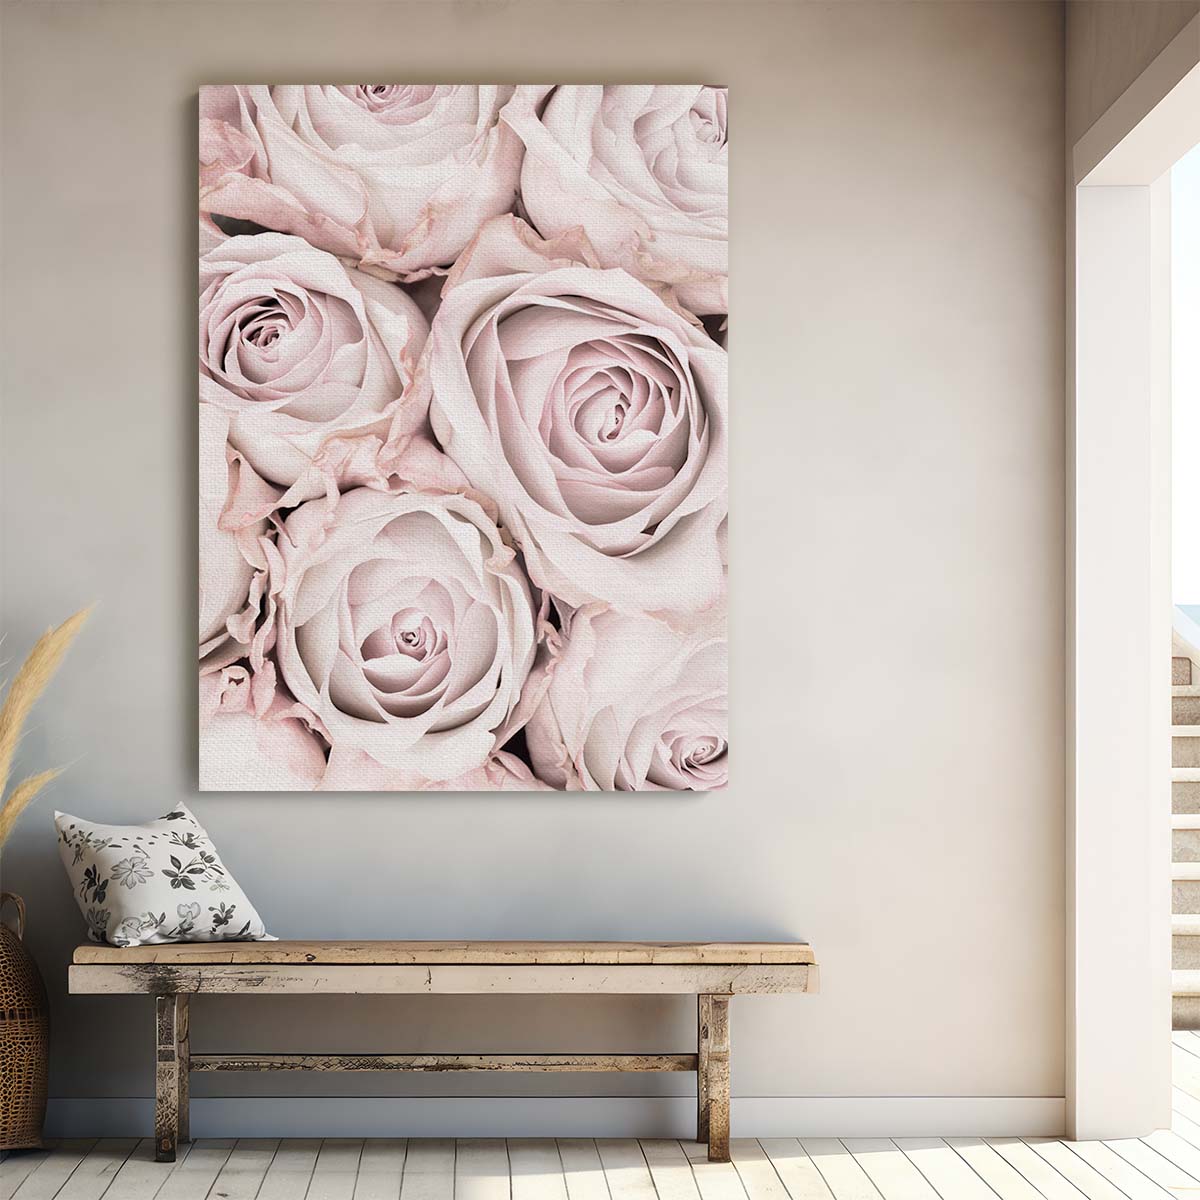 Pastel Pink Rose Macro Photography - Botanical Still Life Art by Luxuriance Designs, made in USA